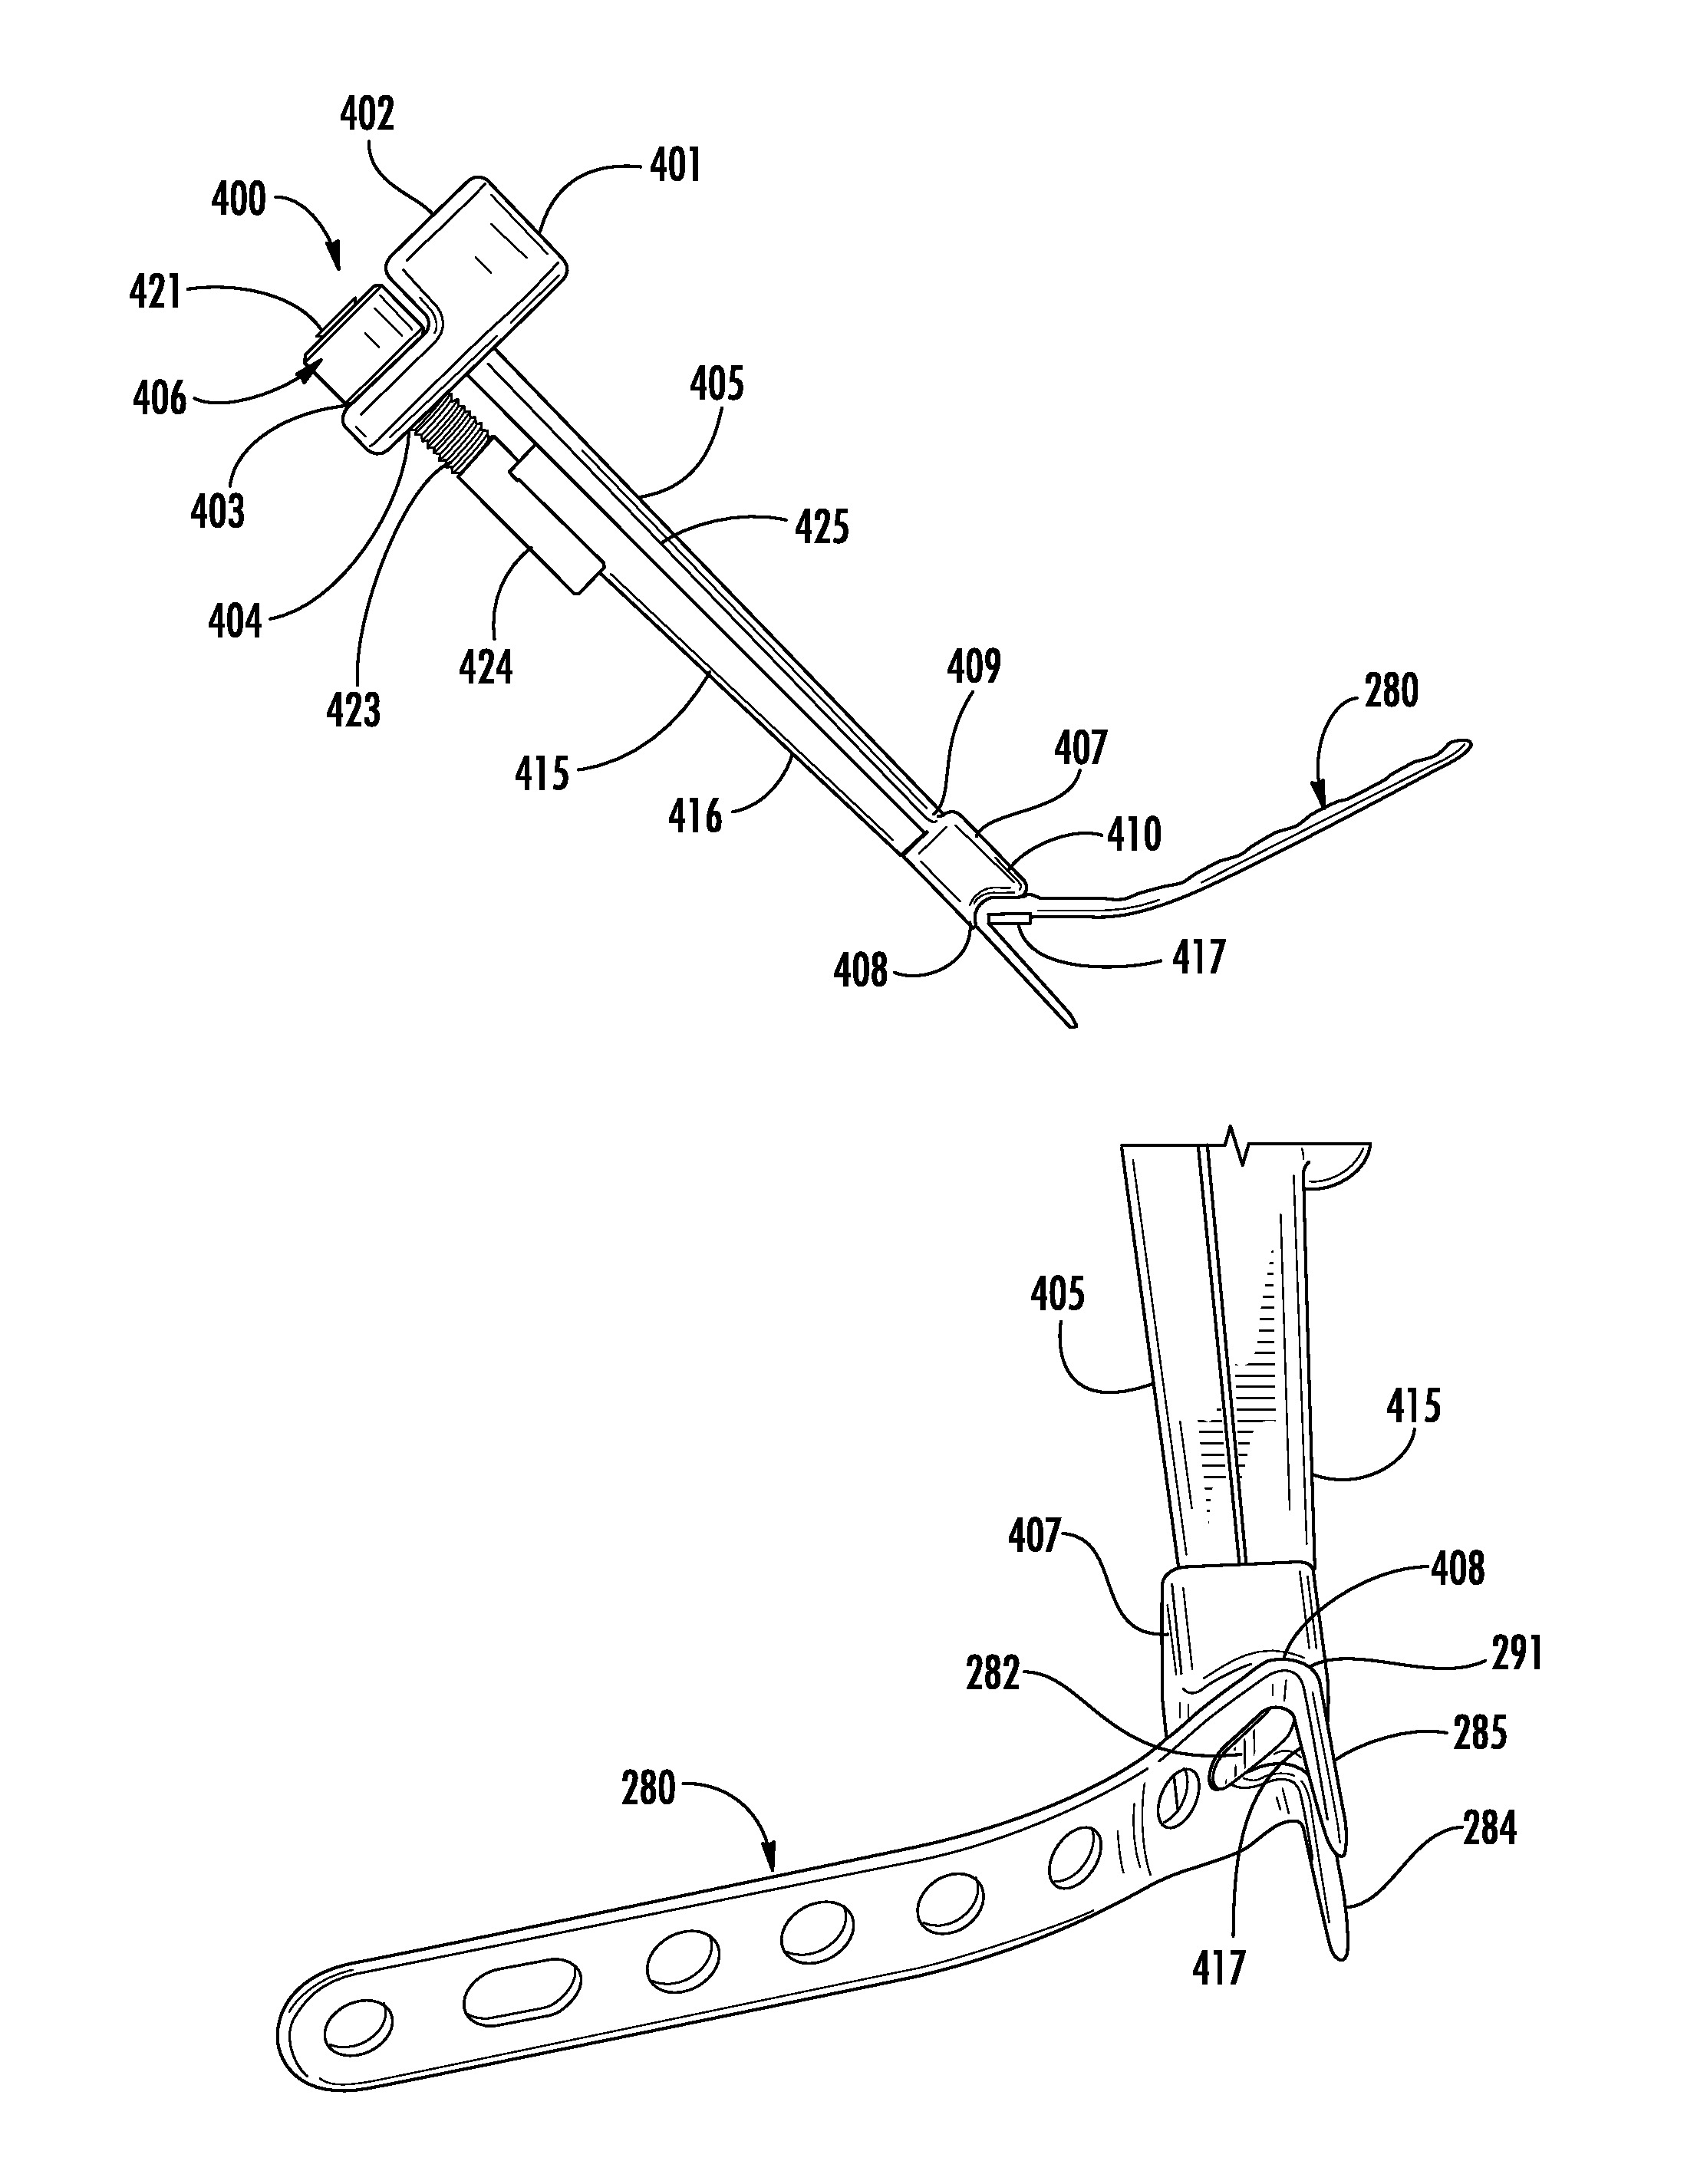 Holder/impactor for contoured bone plate for fracture fixation